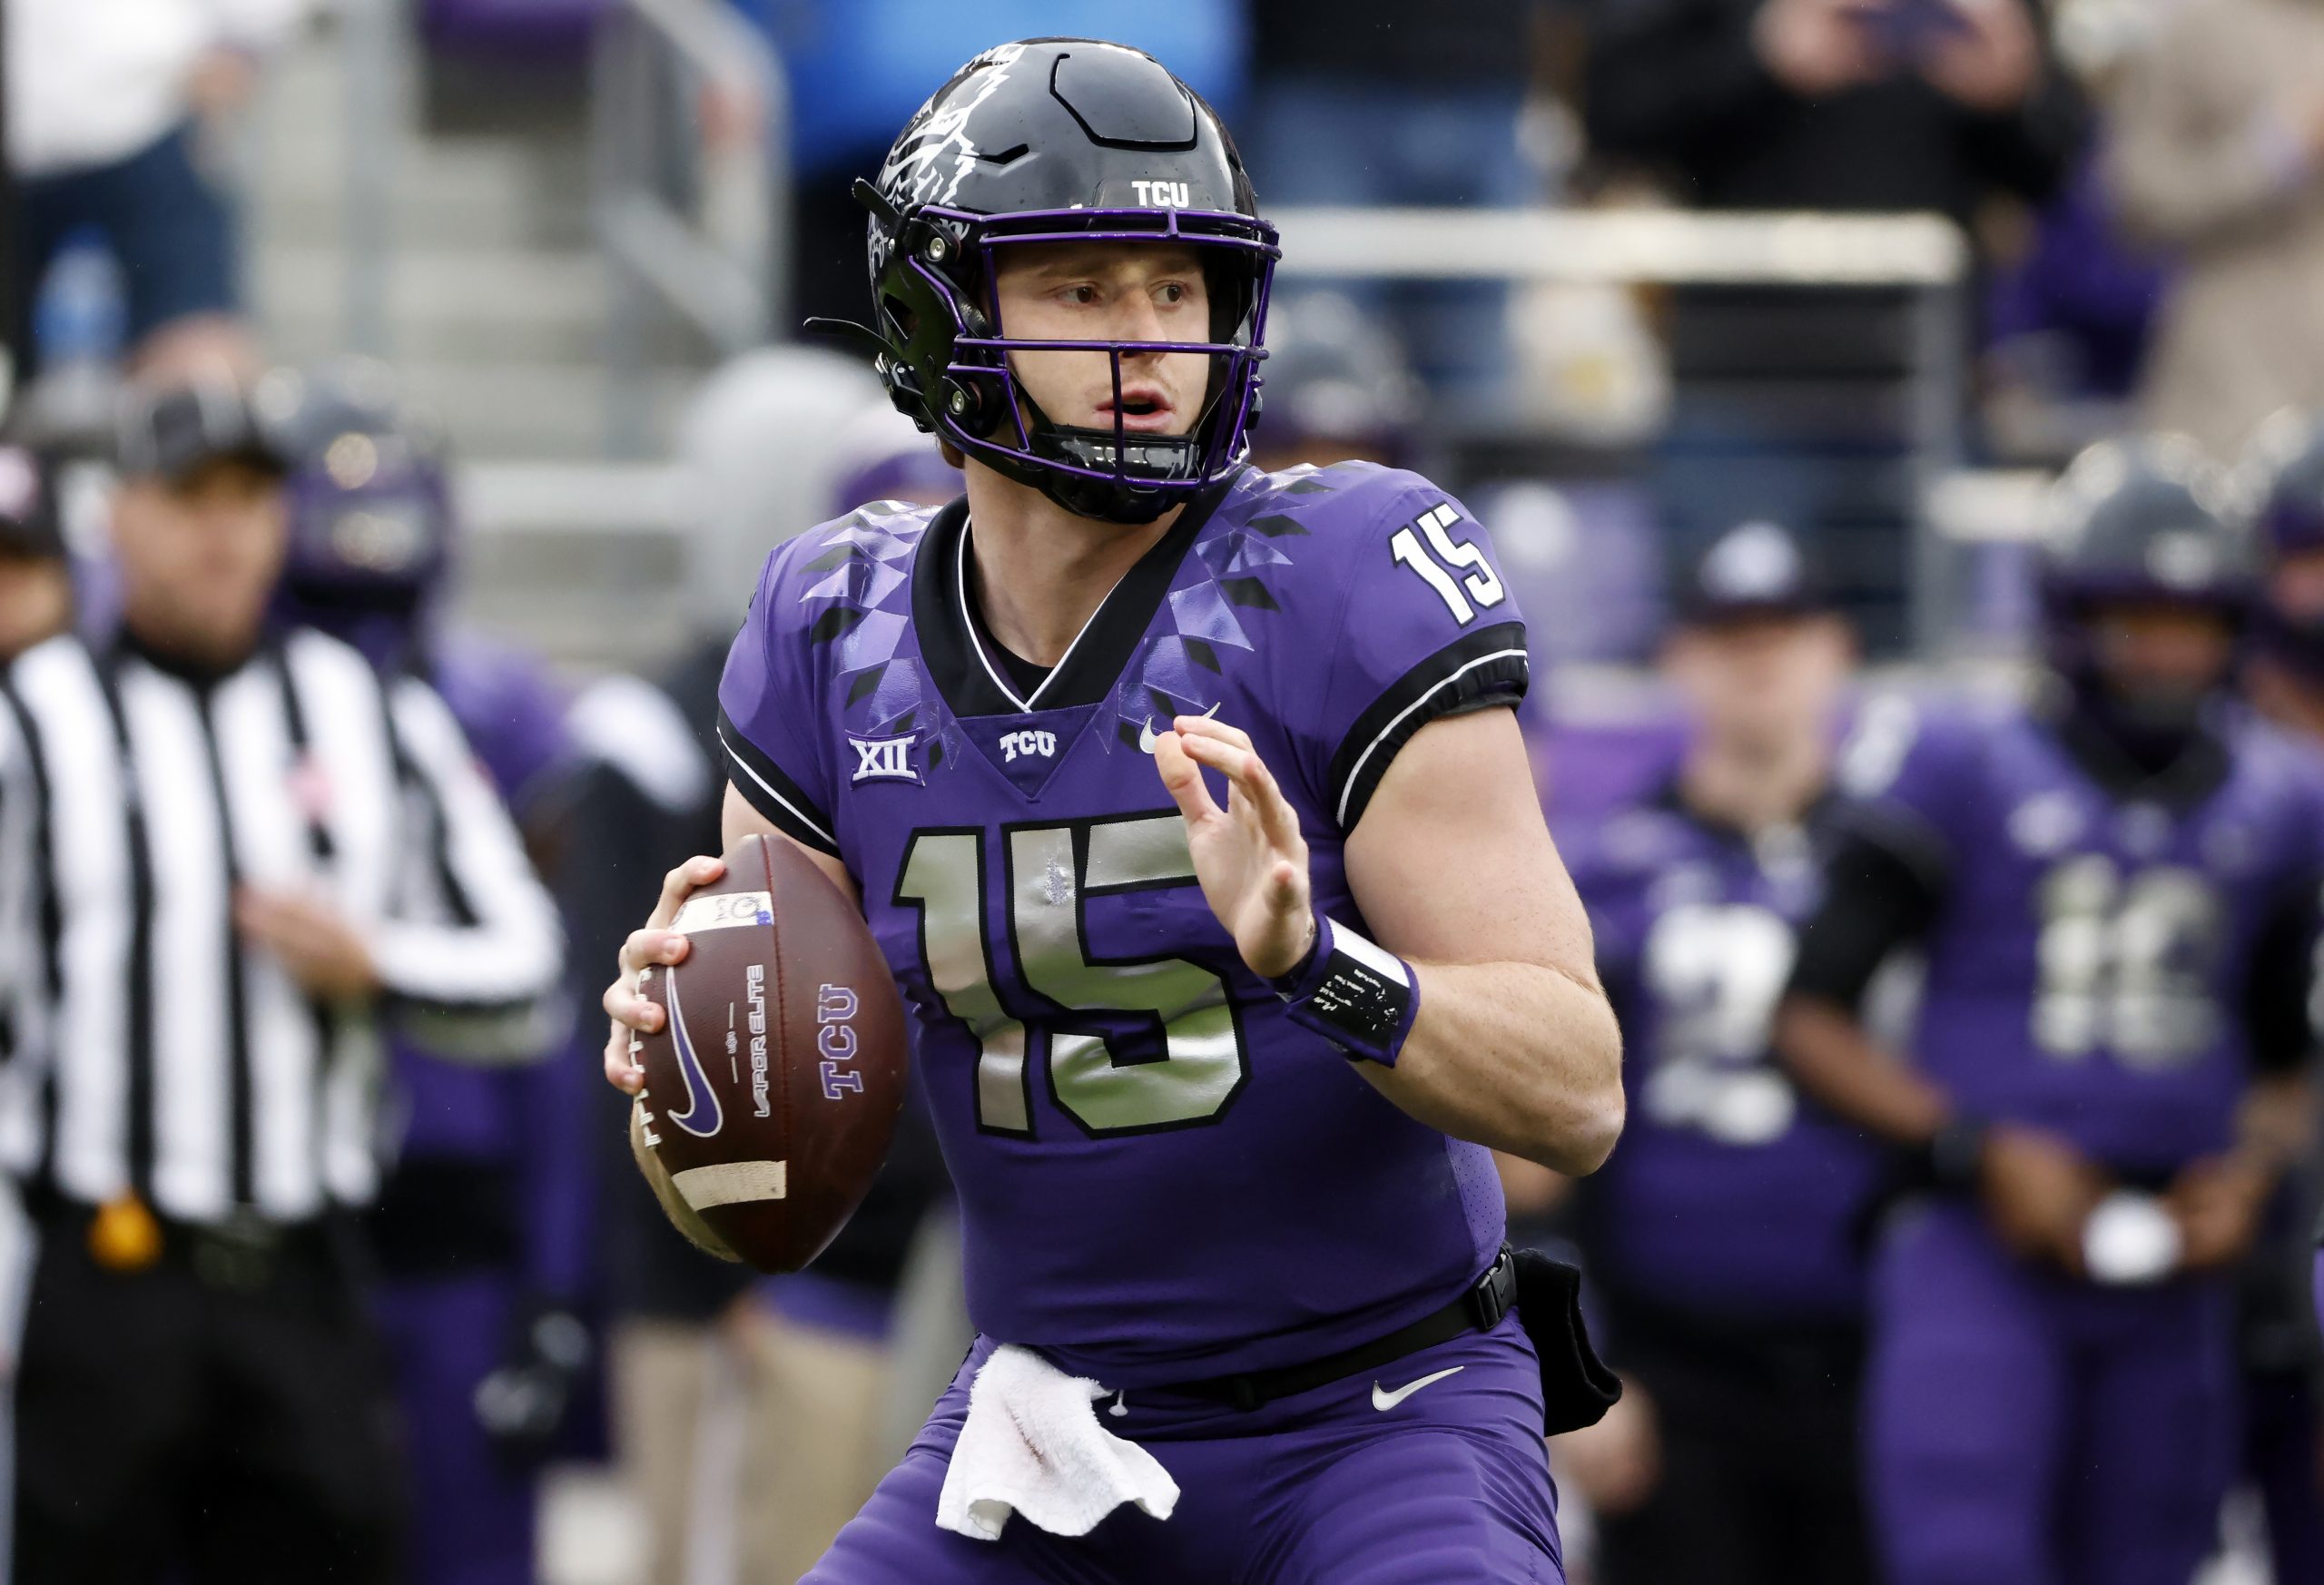 49ers; Quarterback Max Duggan #15 of the TCU Horned Frogs looks to throw against the Iowa State Cyc...